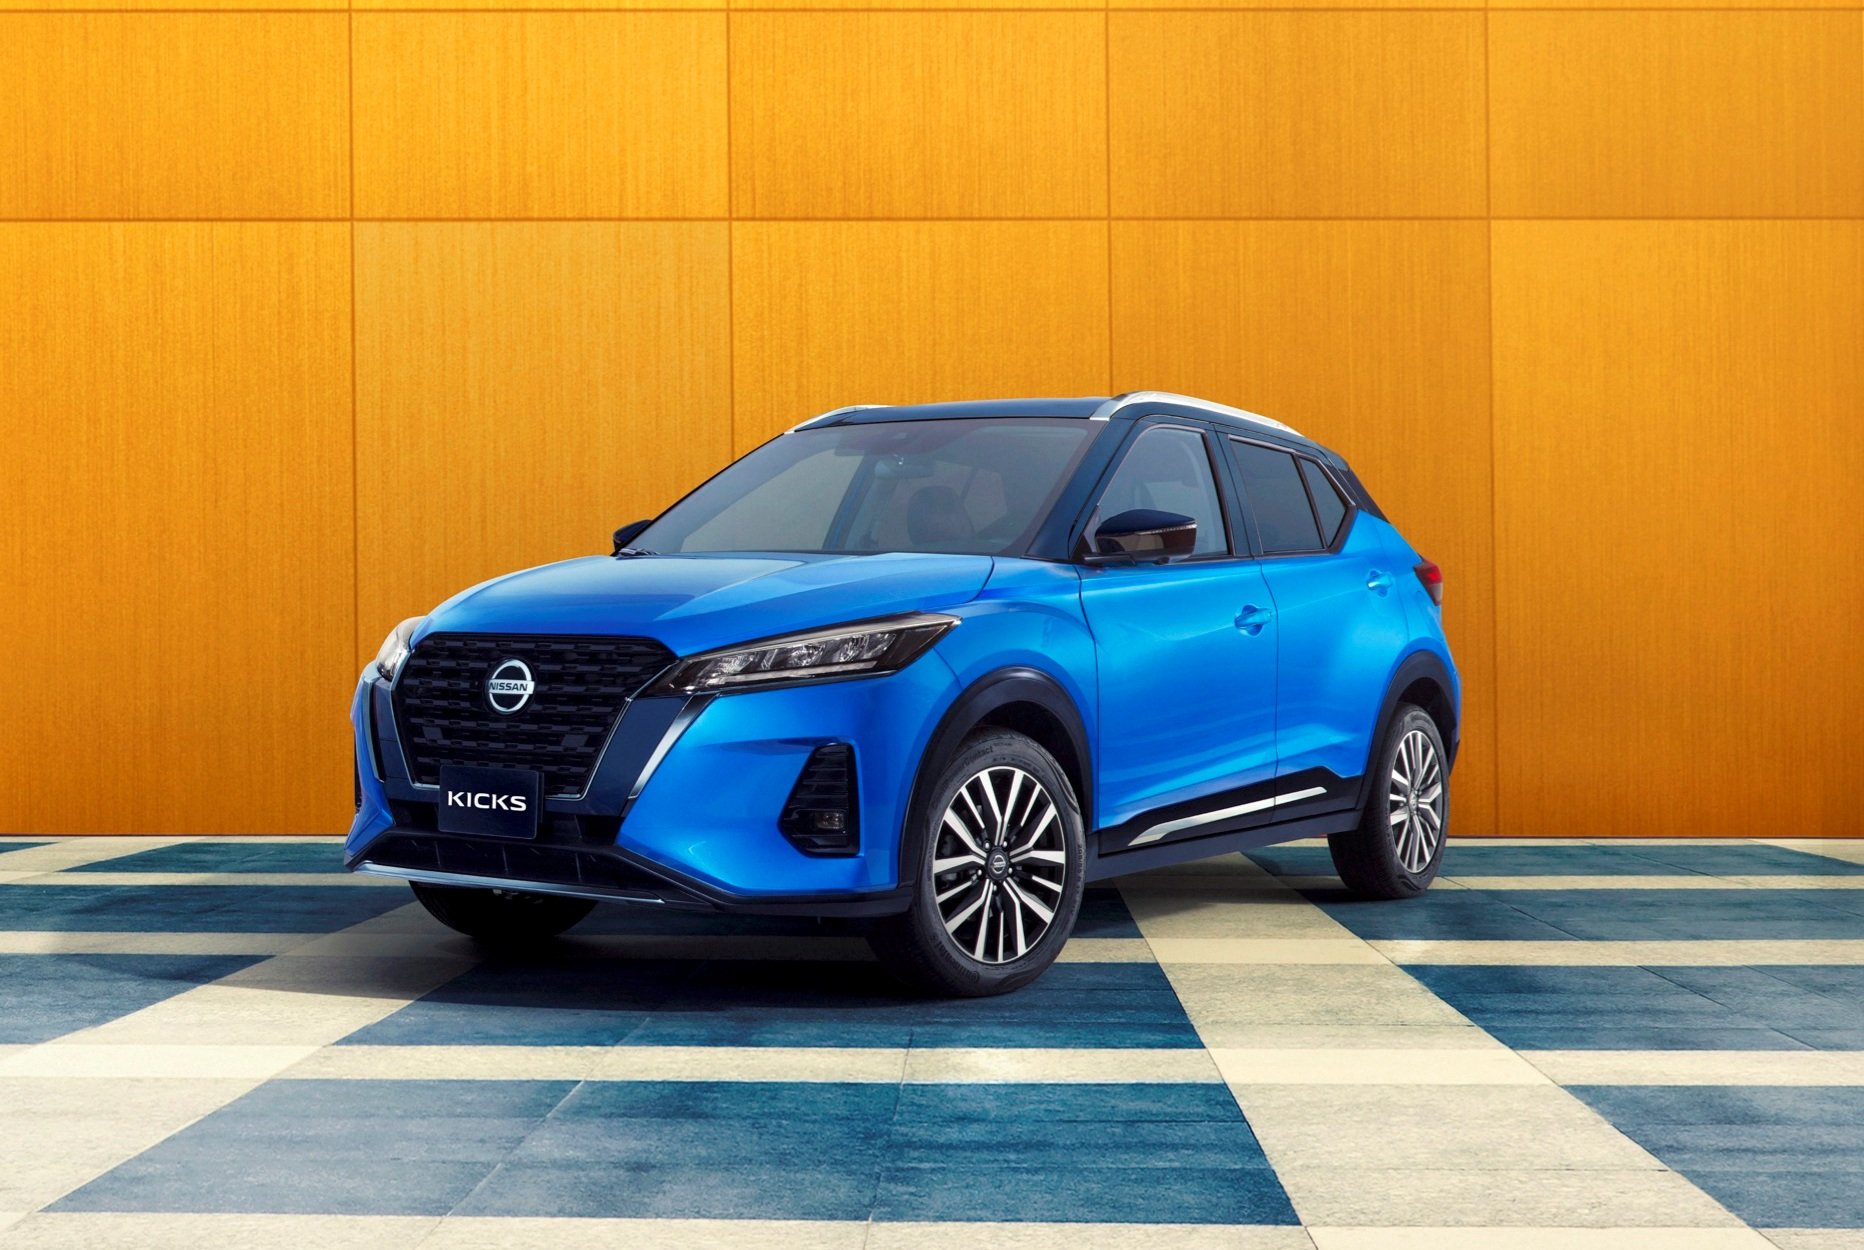 Nissan KICKS continues to win hearts across the Middle East